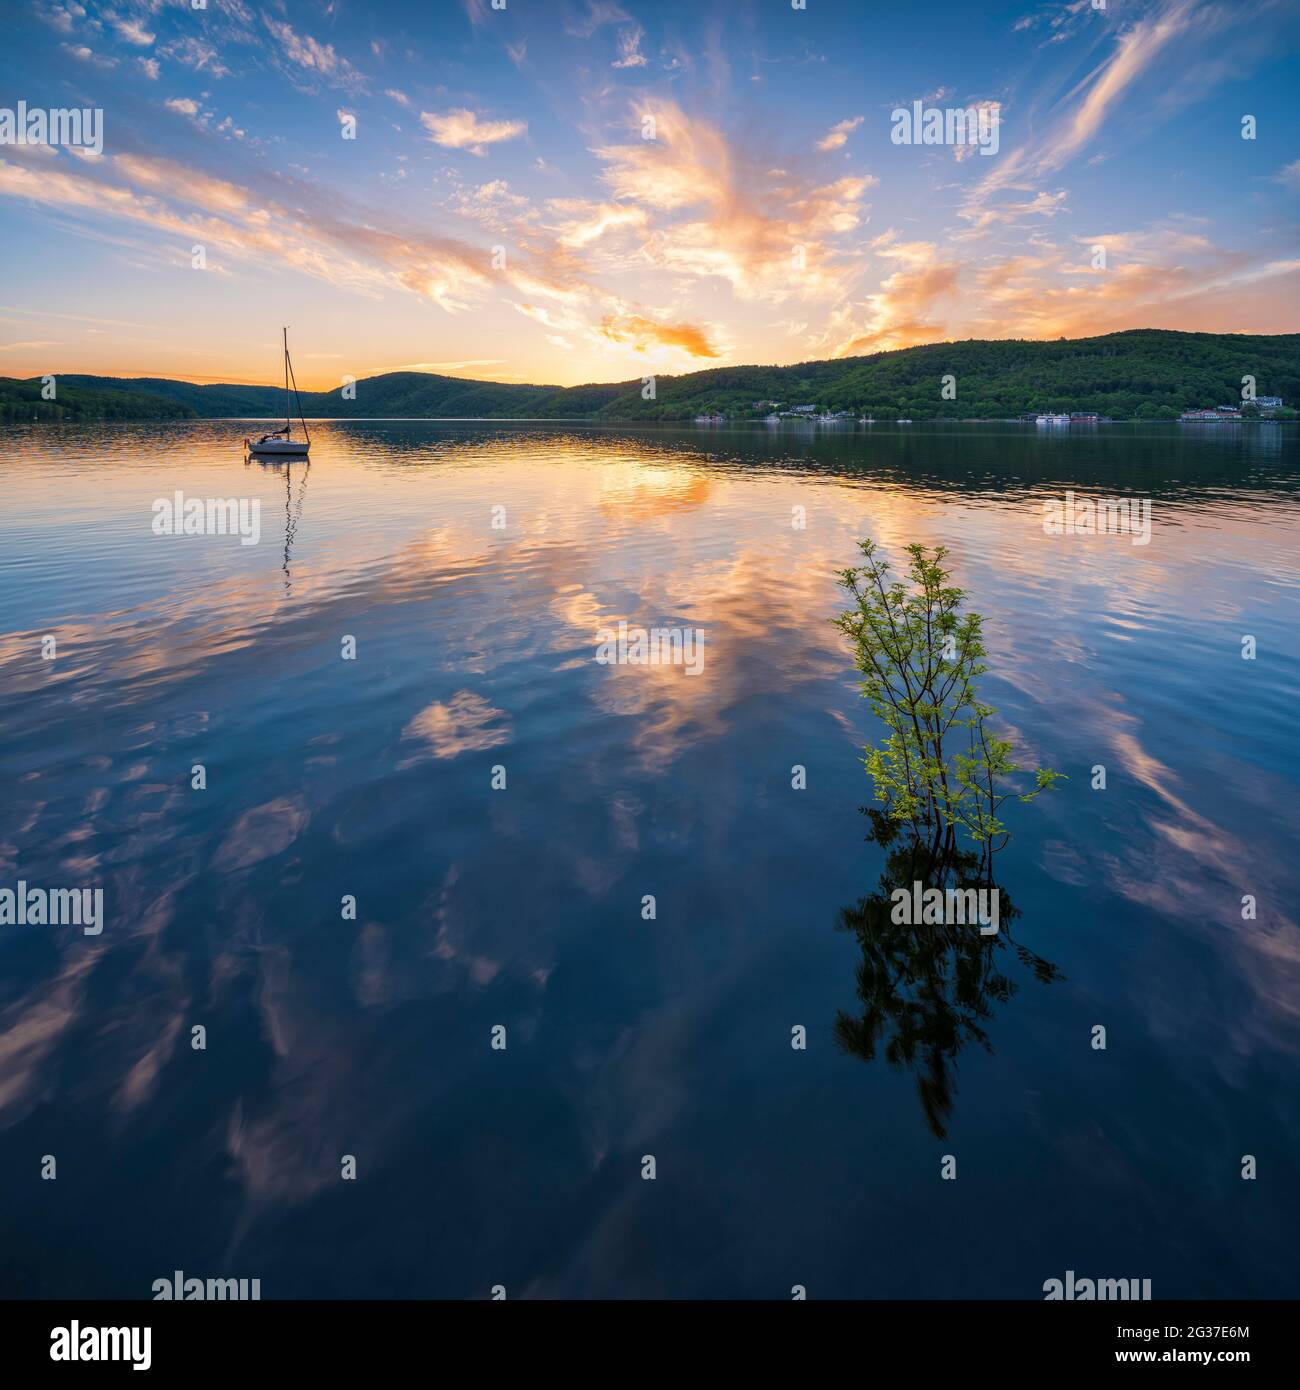 Sunset at the Edersee, small tree in the water and sailboat, Ederstausee, Edertalsperre, behind Schloss Waldeck, Hesse, Germany Stock Photo